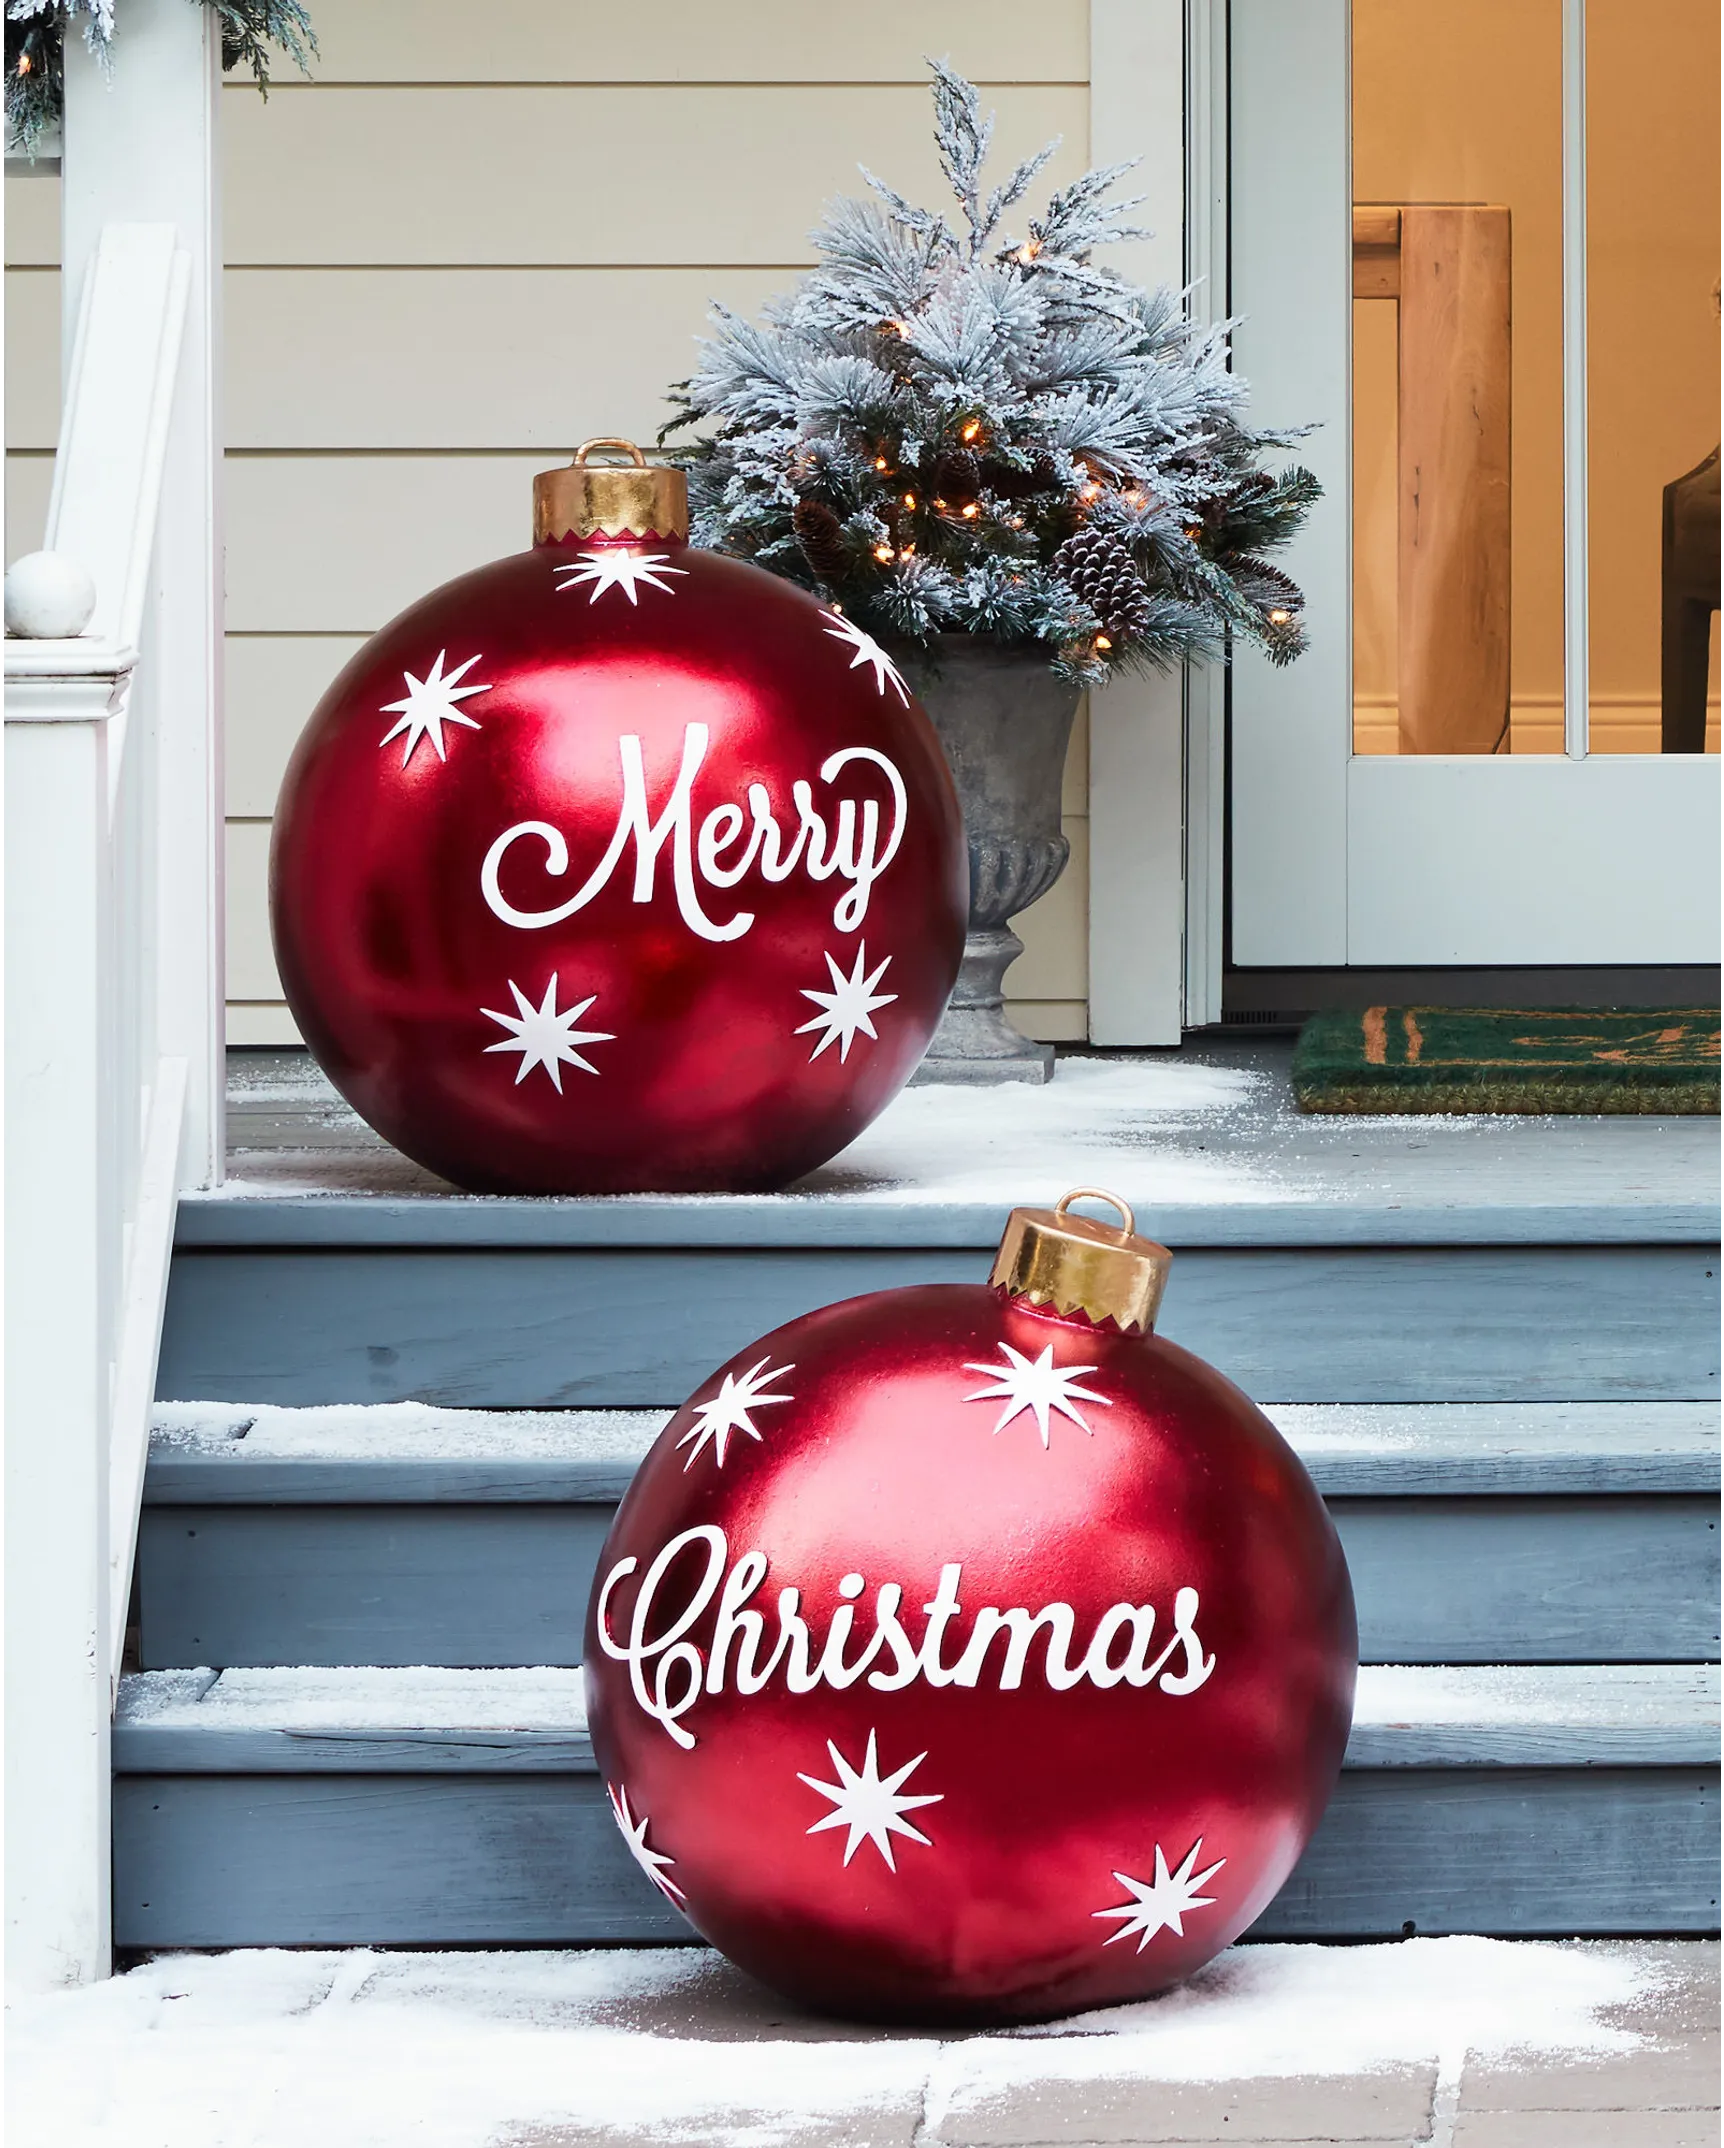 Your guide to fillable Christmas baubles